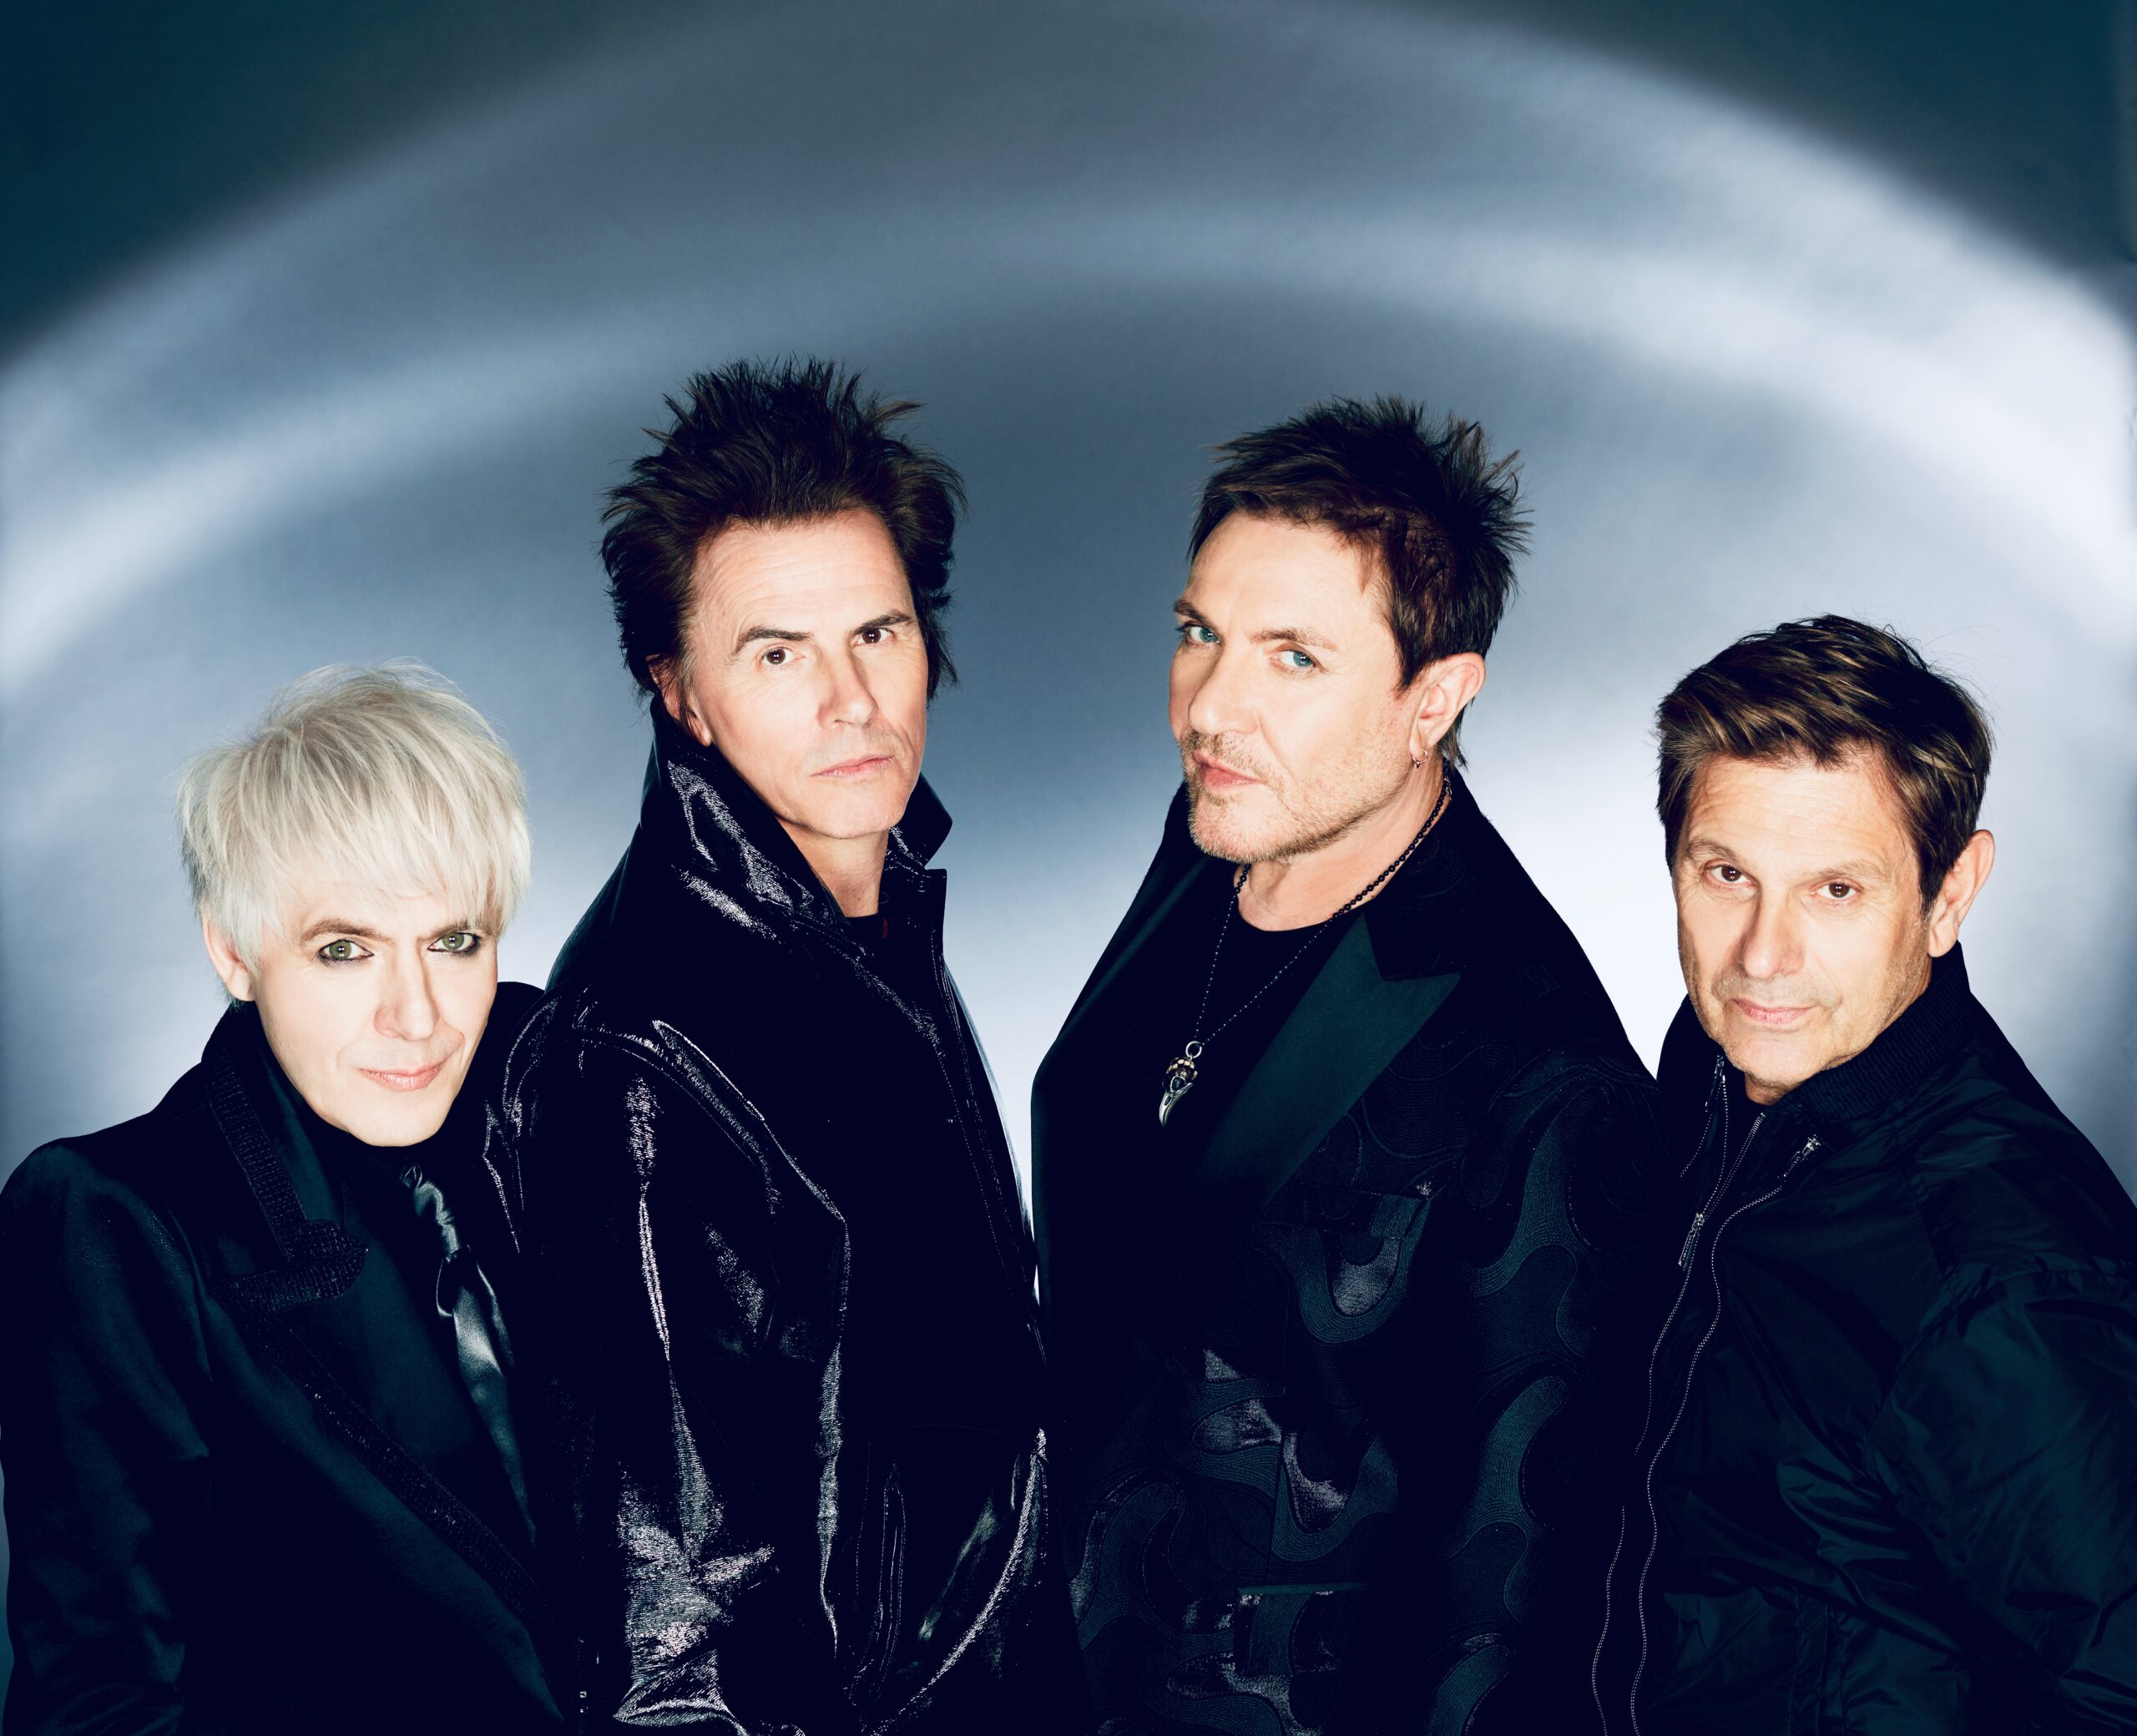 DURAN DURAN RELEASE BRAND NEW TRACK ‘MORE JOY!’ FEAT CHAI TAKEN FROM THEIR UPCOMING ALBUM ‘FUTURE PAST’ OUT OCTOBER 22